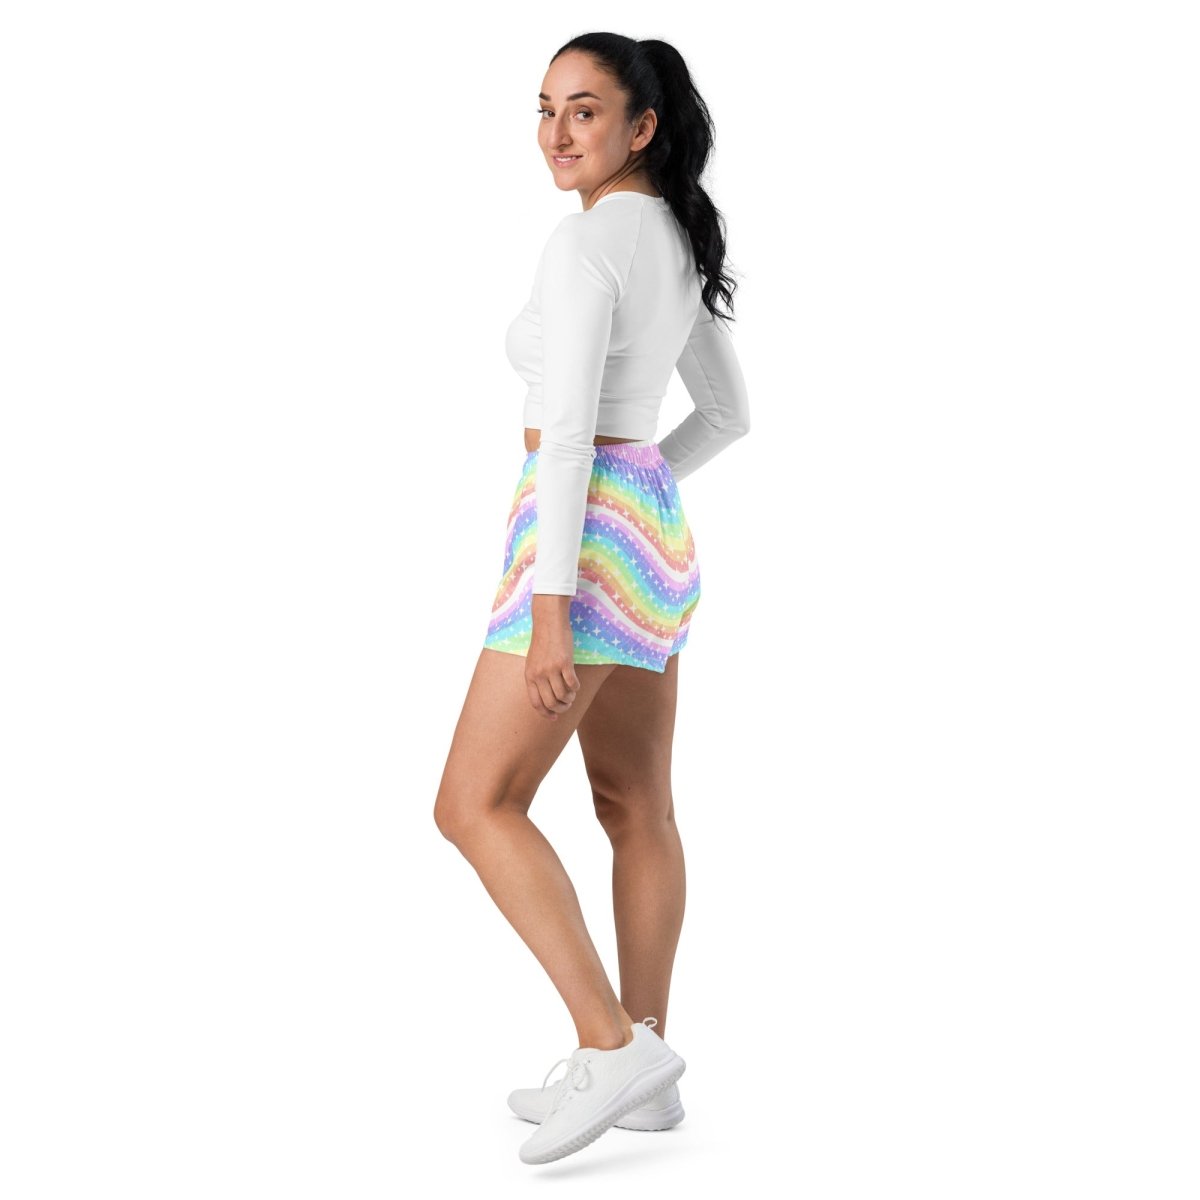 Starry Pastel Rainbow Athletic Shorts - On Trend Shirts